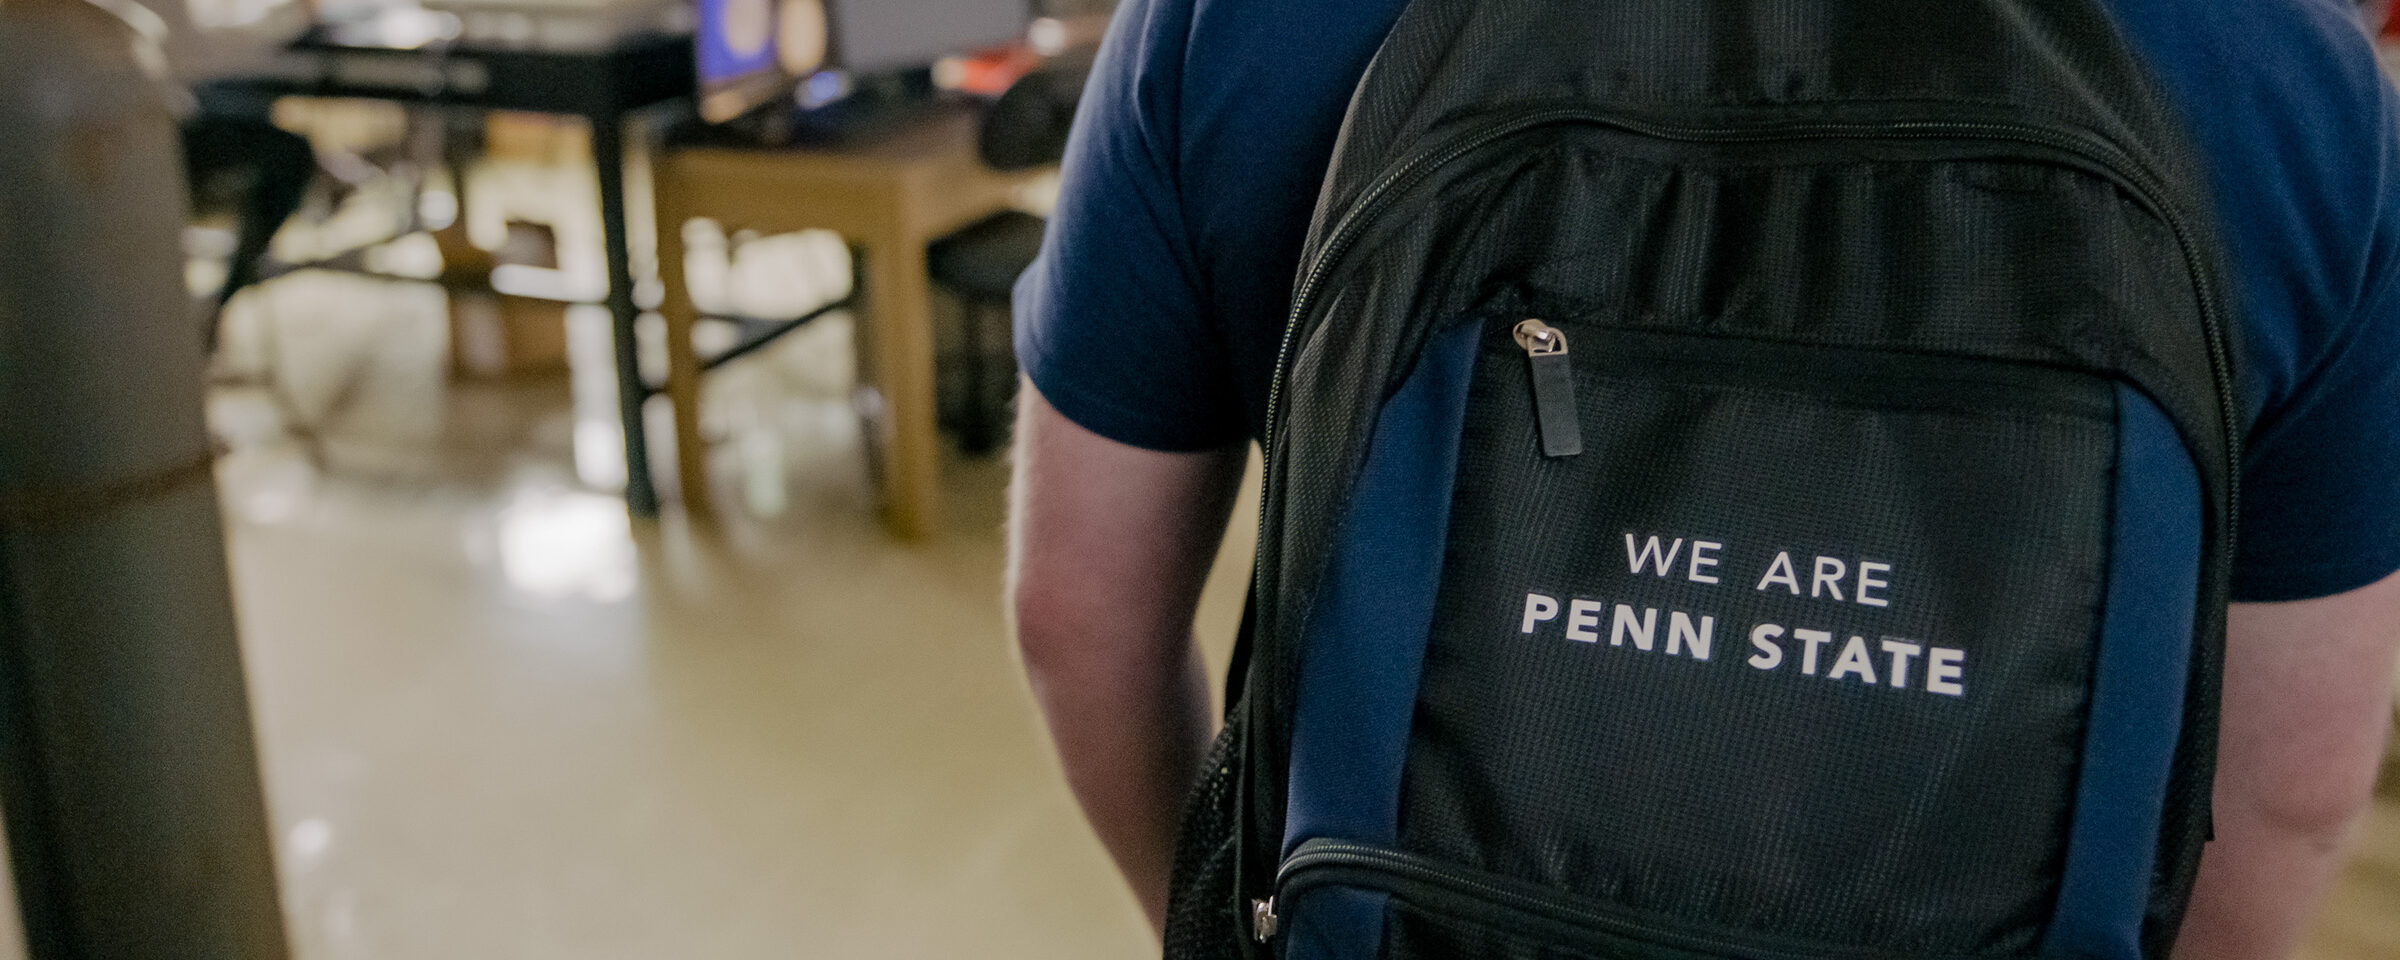 Student wearing a backpack with text 'We Are Penn State'